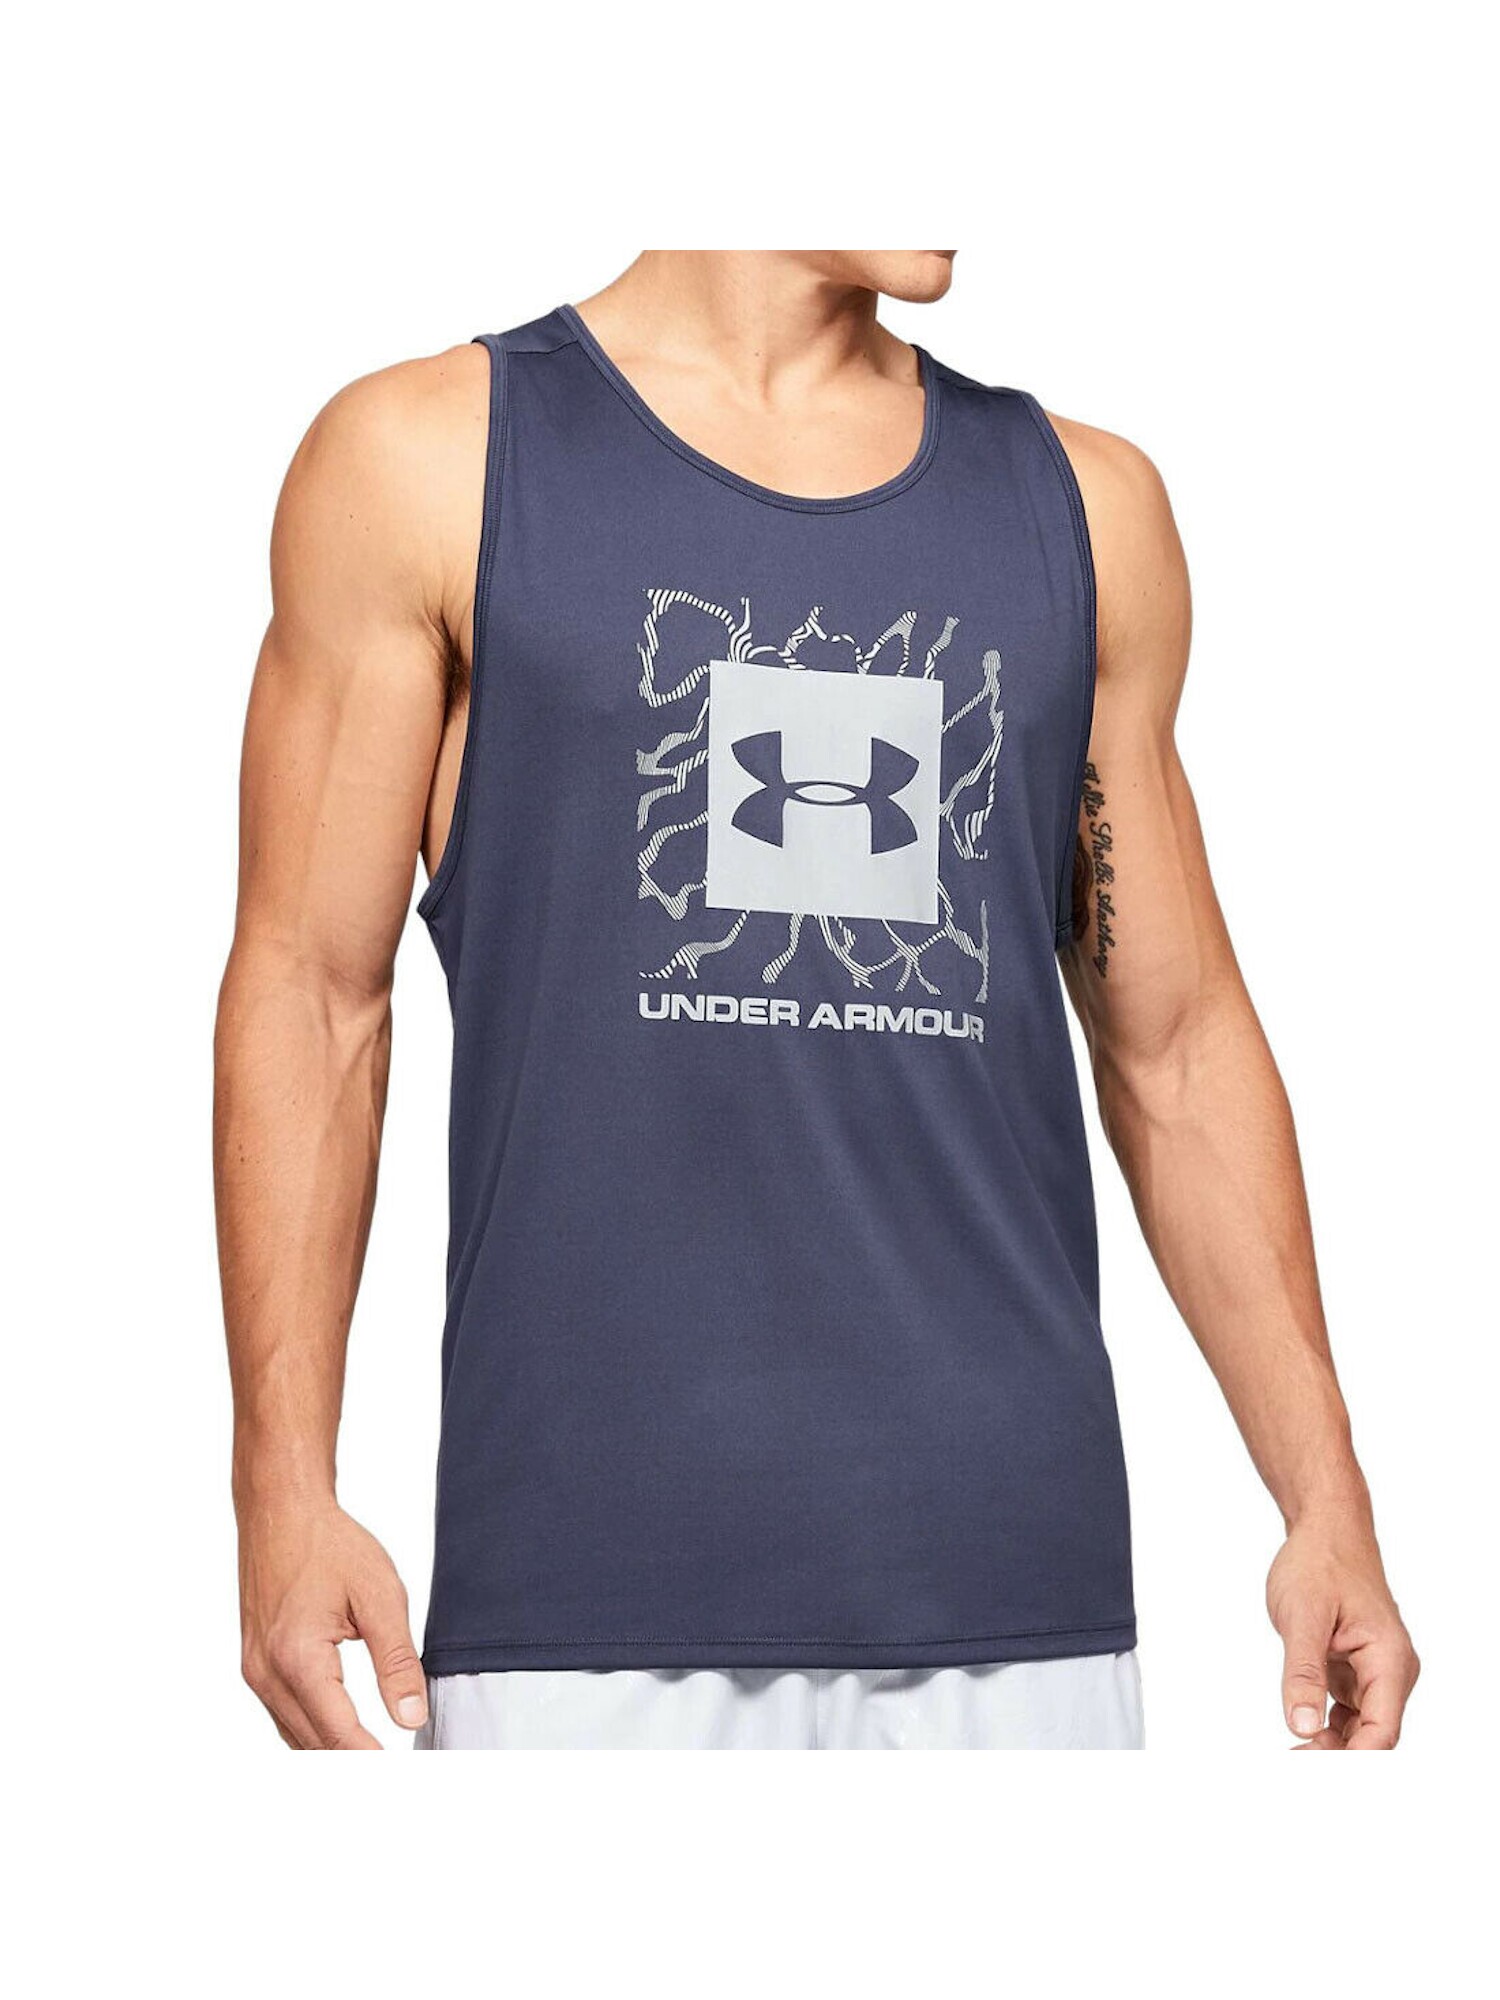 UNDER ARMOUR Mens Blue Logo Graphic Sleeveless Scoop Neck Tank Top S - image 1 of 3